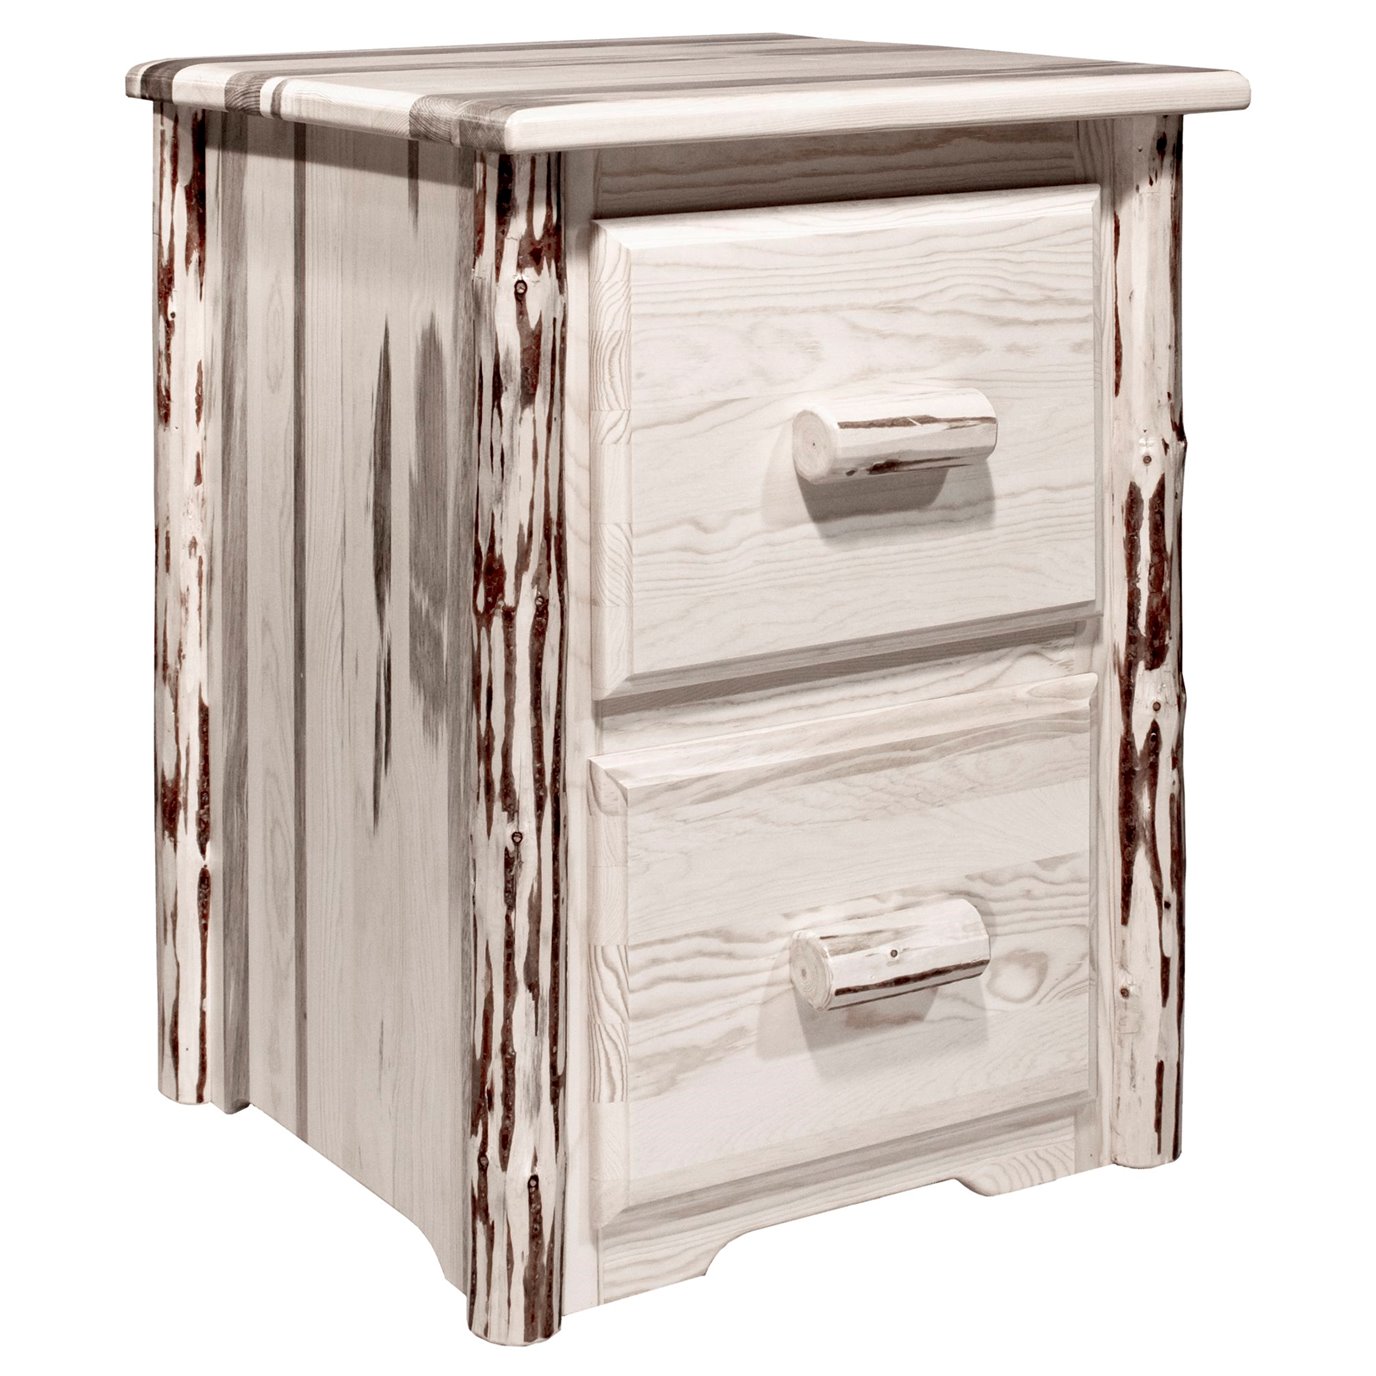 Montana 2 Drawer File Cabinet - Clear Lacquer Finish